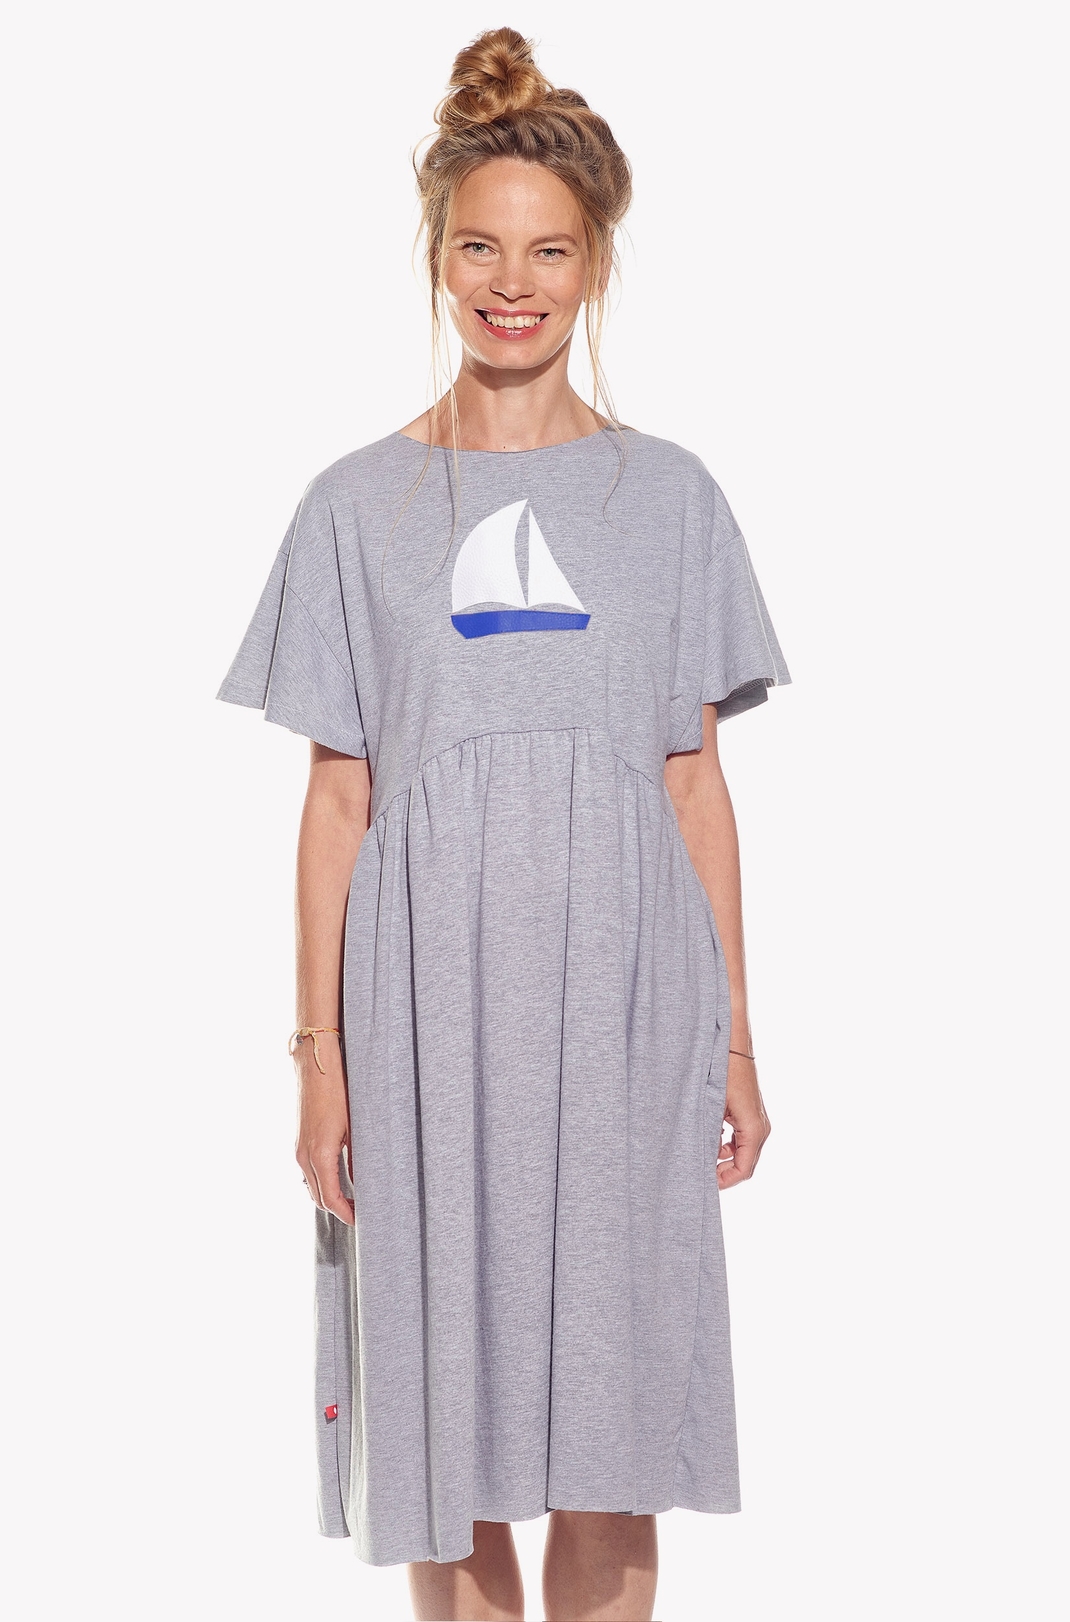 Dresses with sailboat